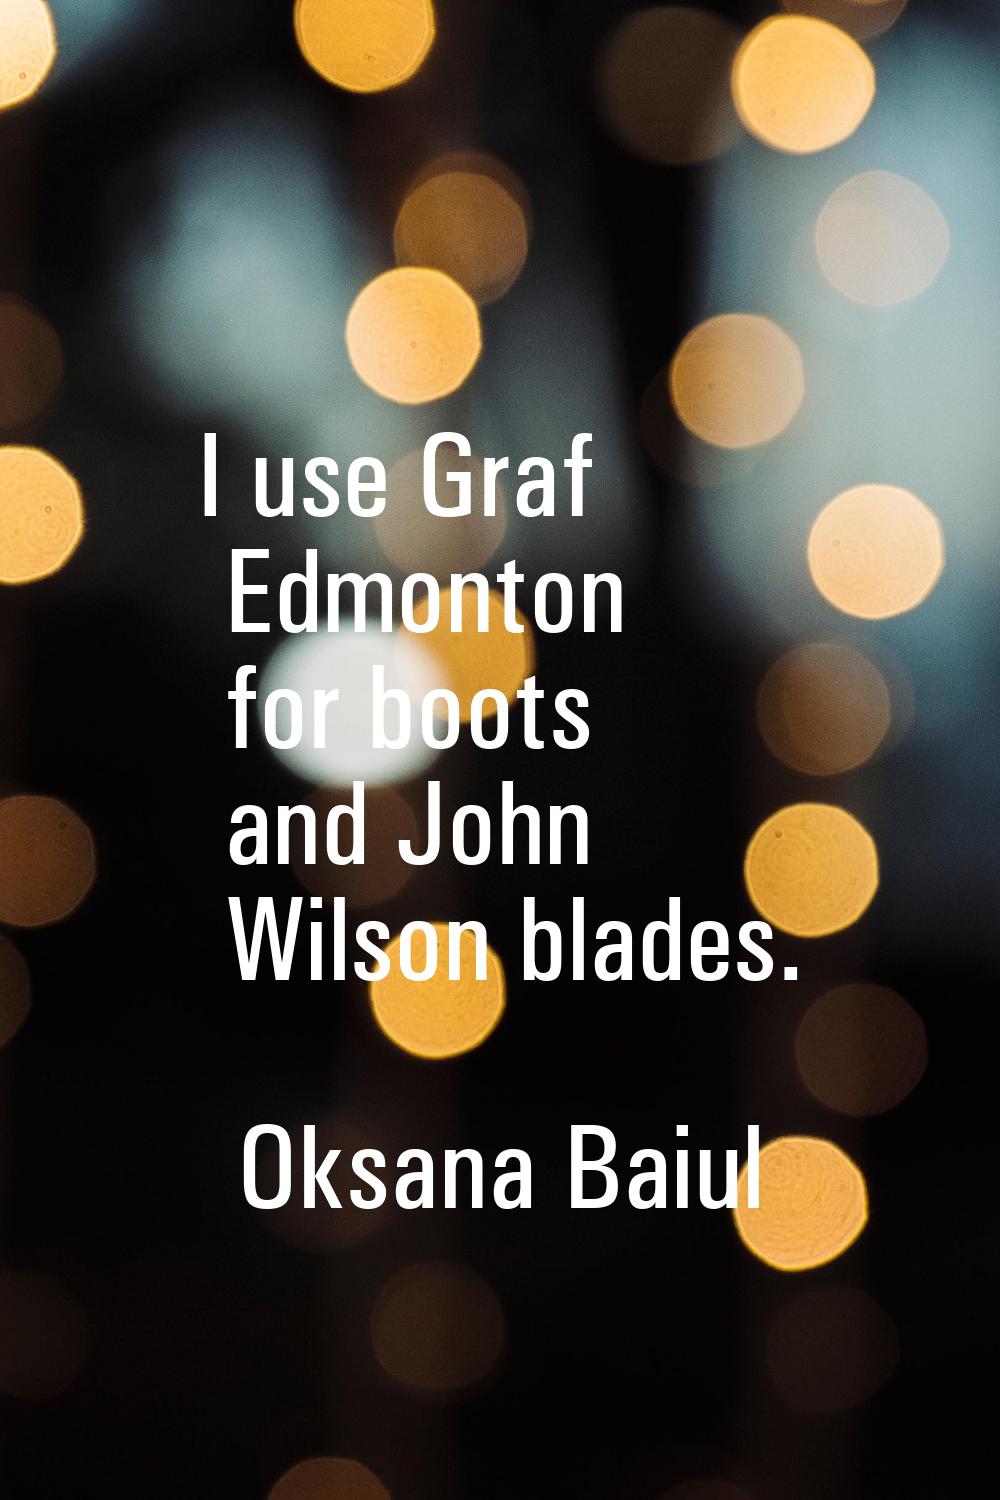 I use Graf Edmonton for boots and John Wilson blades.